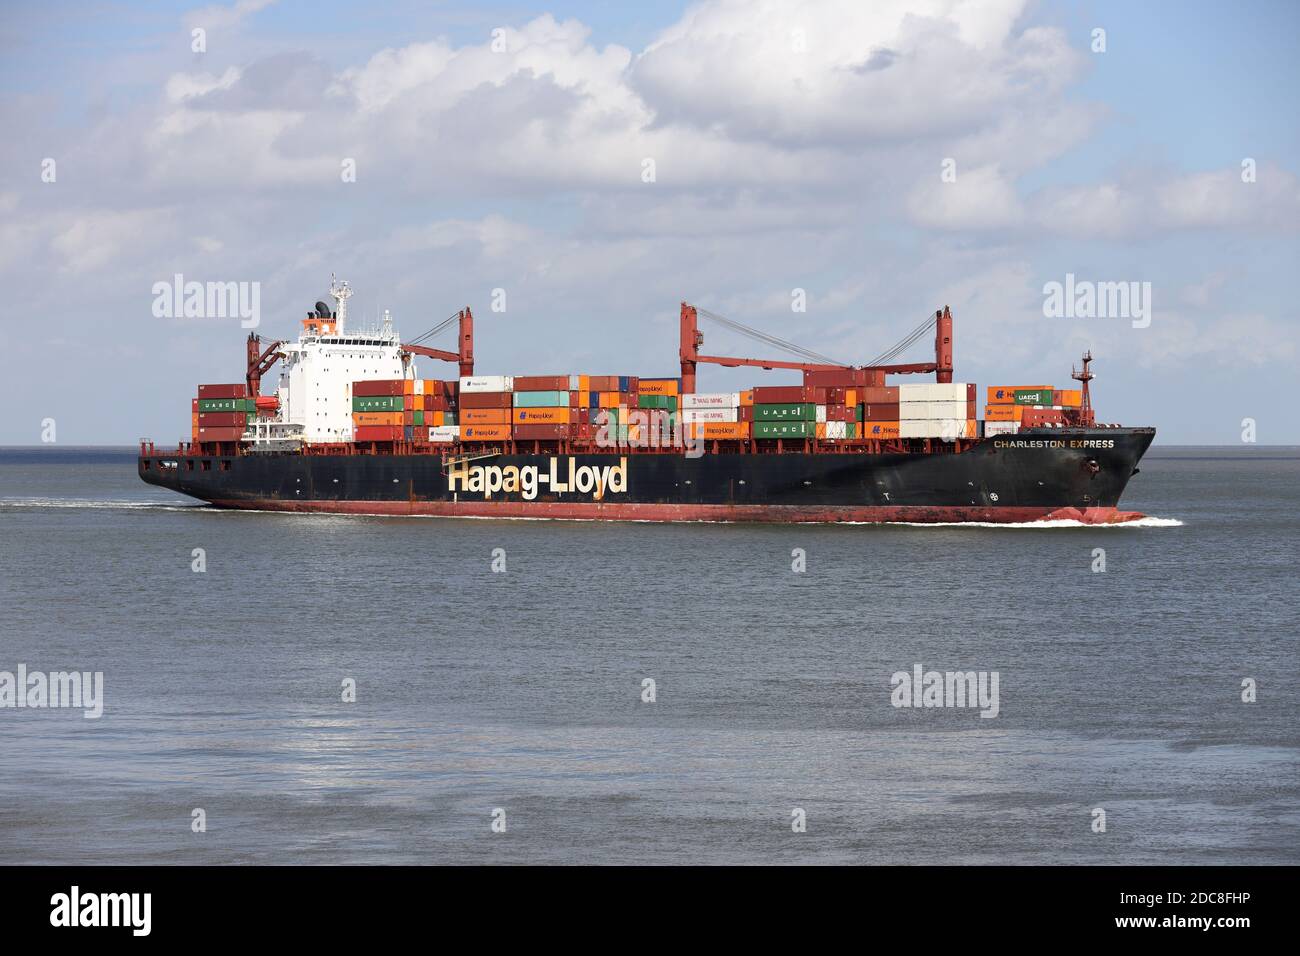 The container ship Charleston Express will pass Cuxhaven on August 22, 2020 on its way to Hamburg. Stock Photo